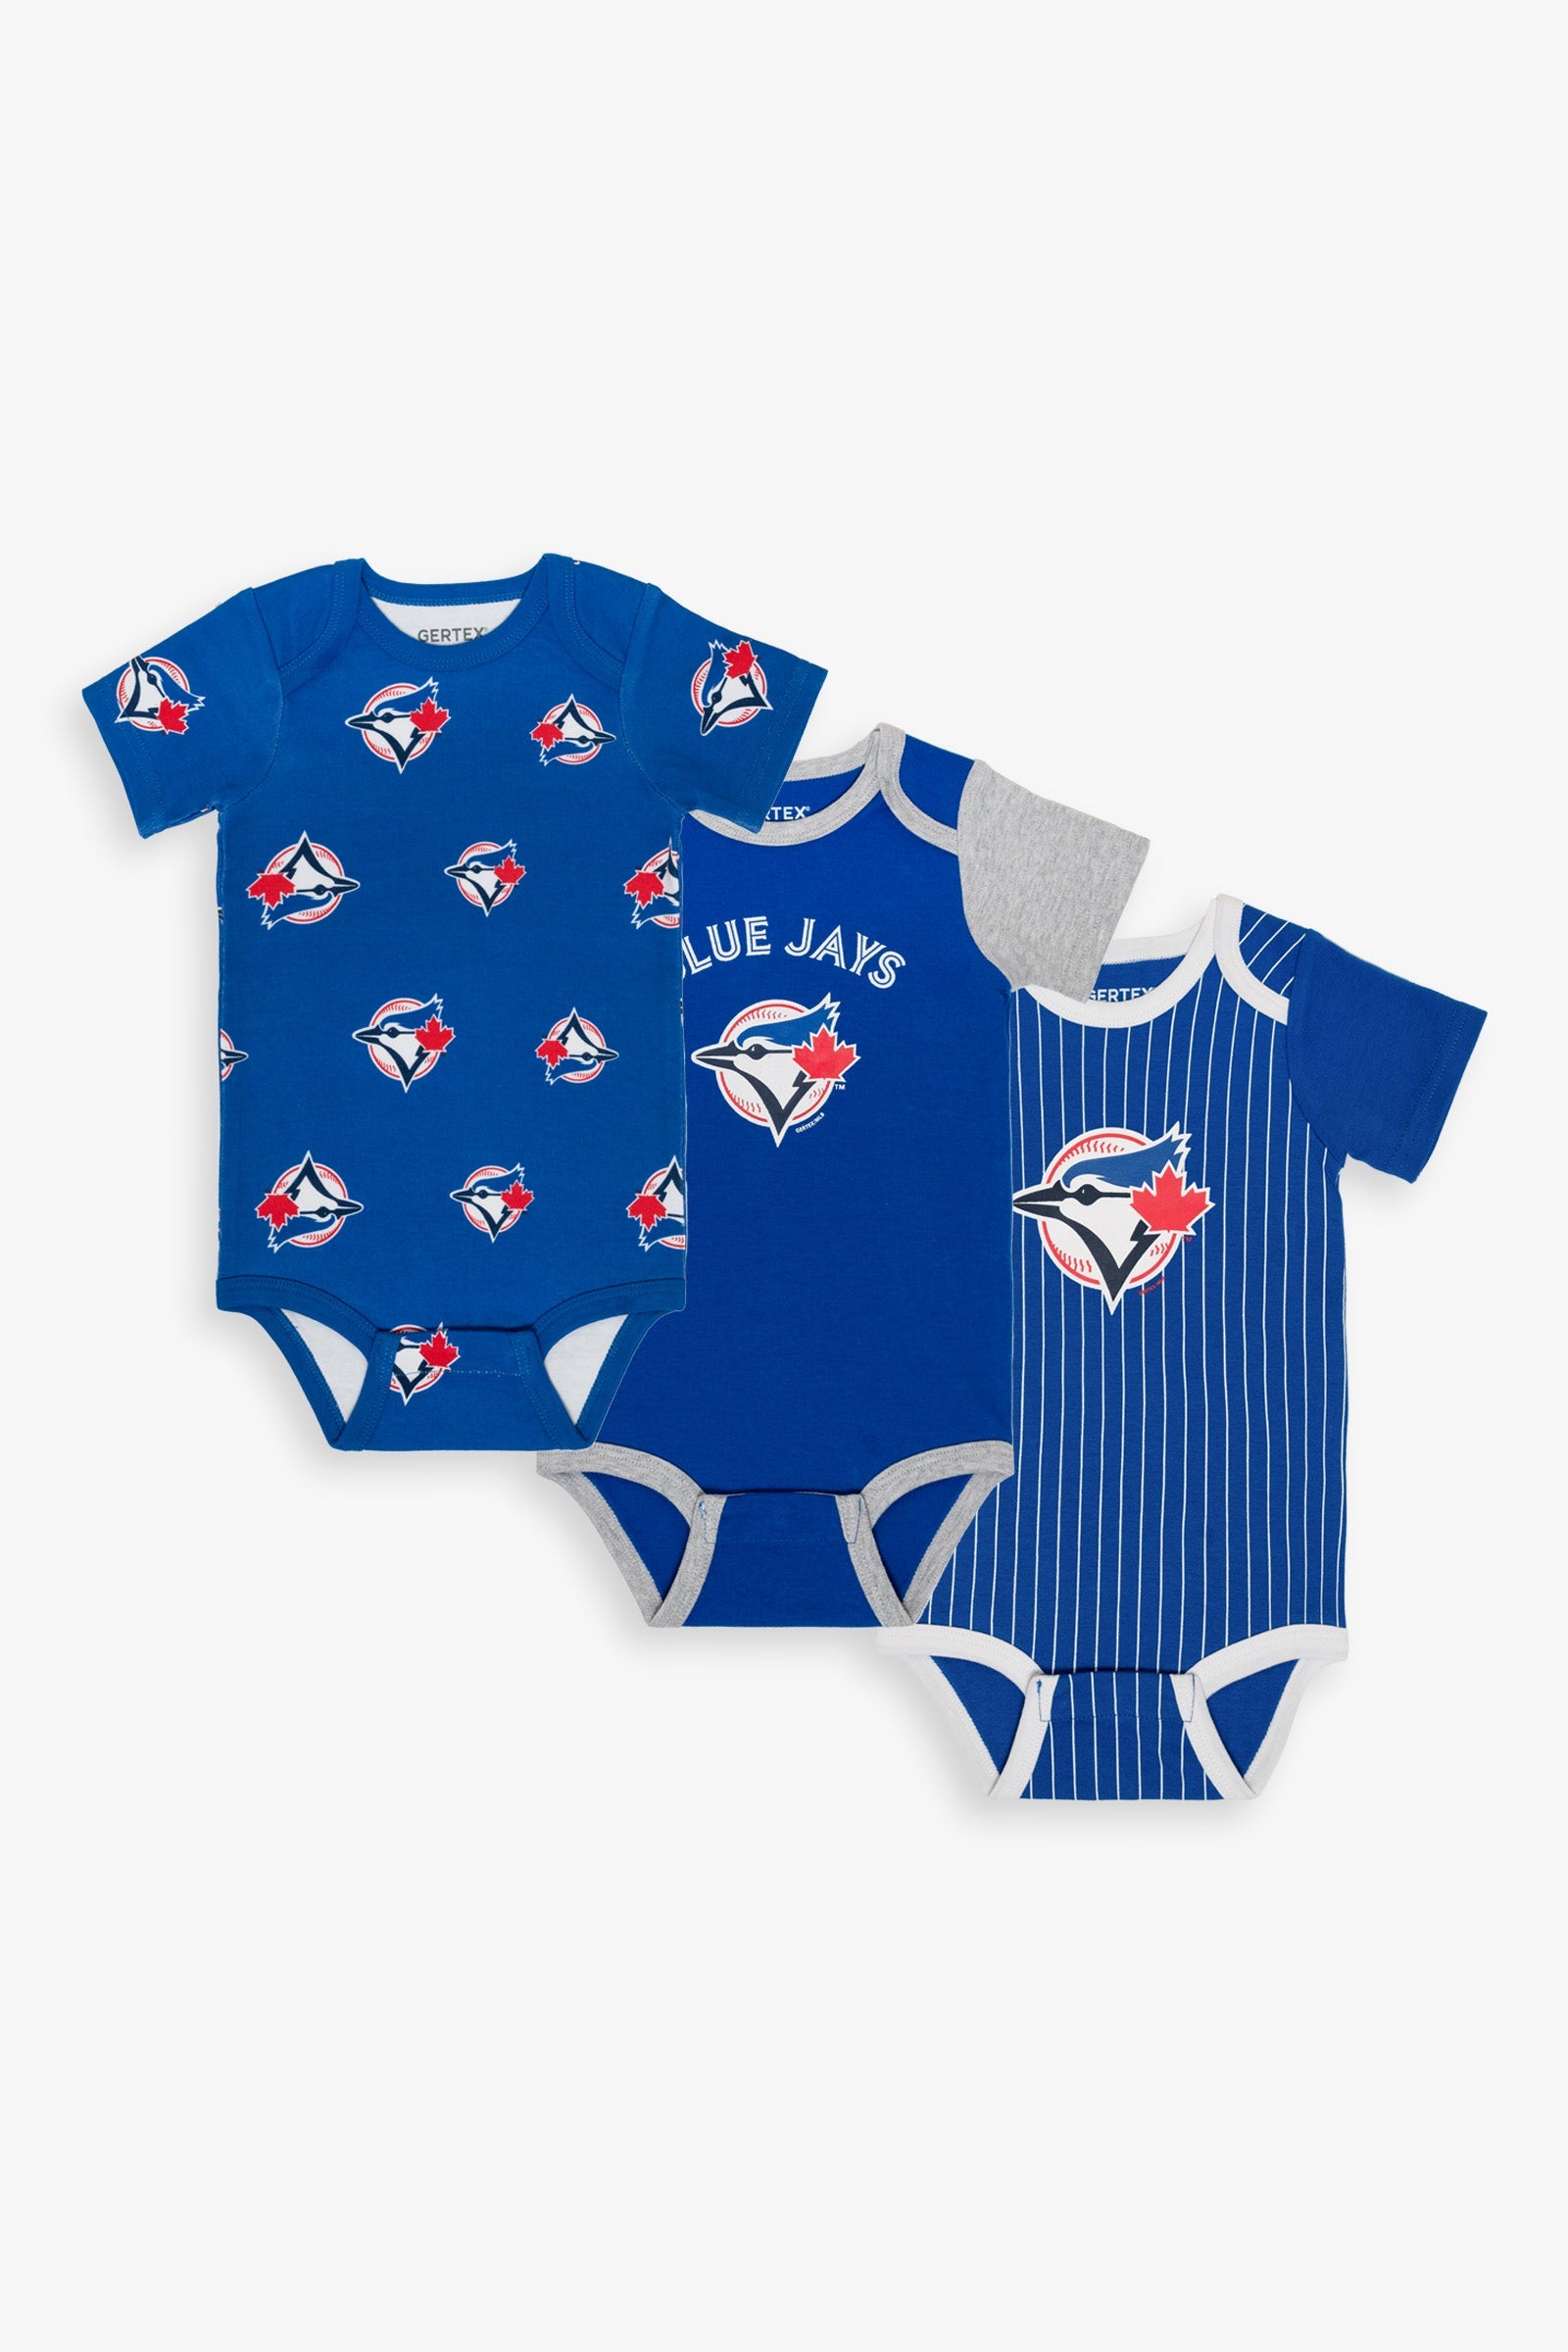 Baby Clothing for sale in Toronto, Ontario